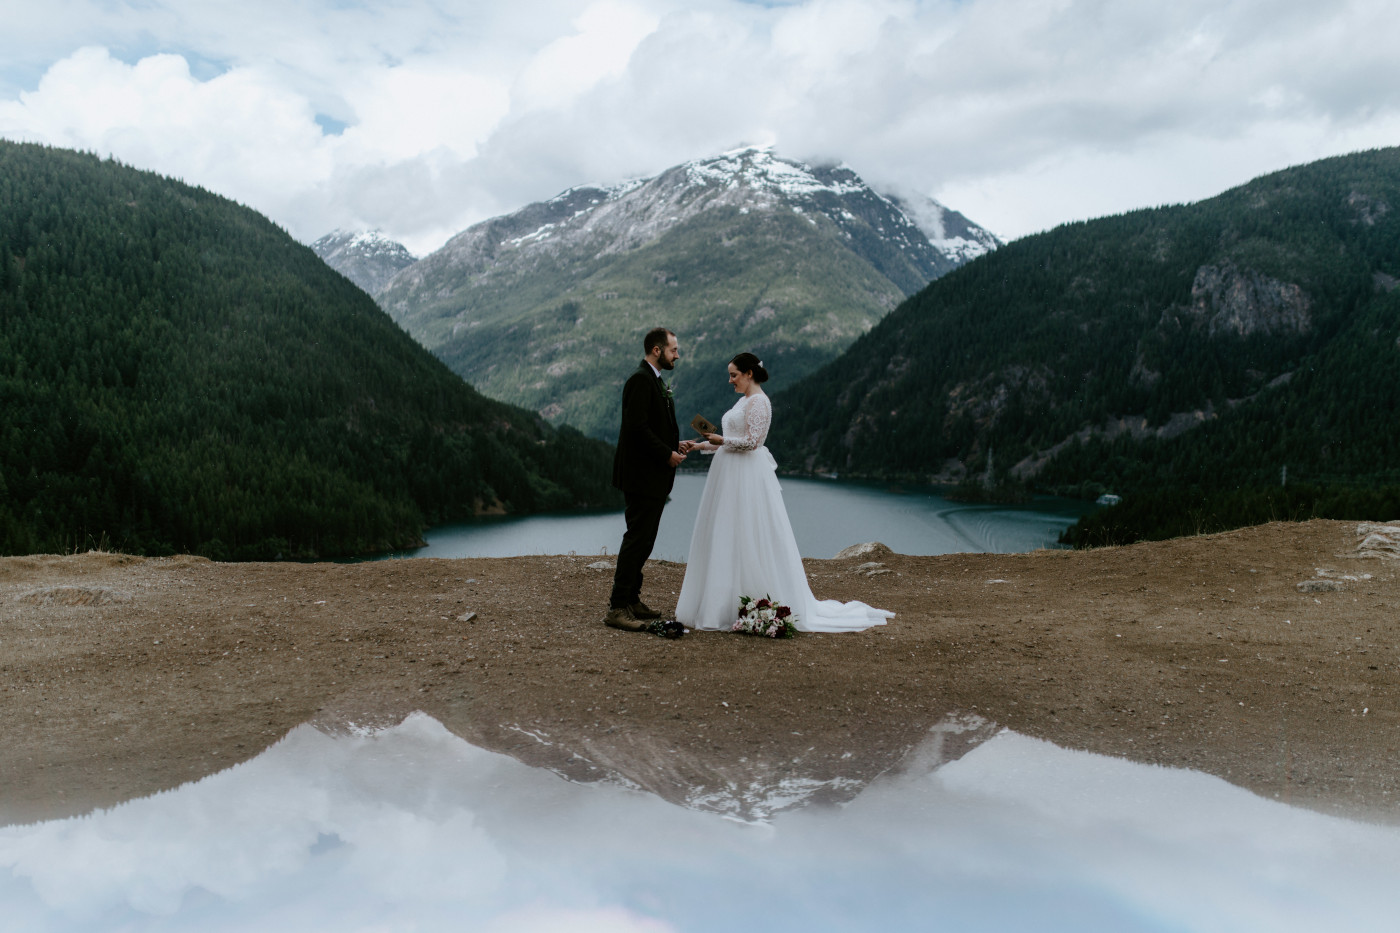 Alex and Elizabeth at Diablo Lake Overlook reciting their vows. Elopement photography at North Cascades National Park by Sienna Plus Josh.